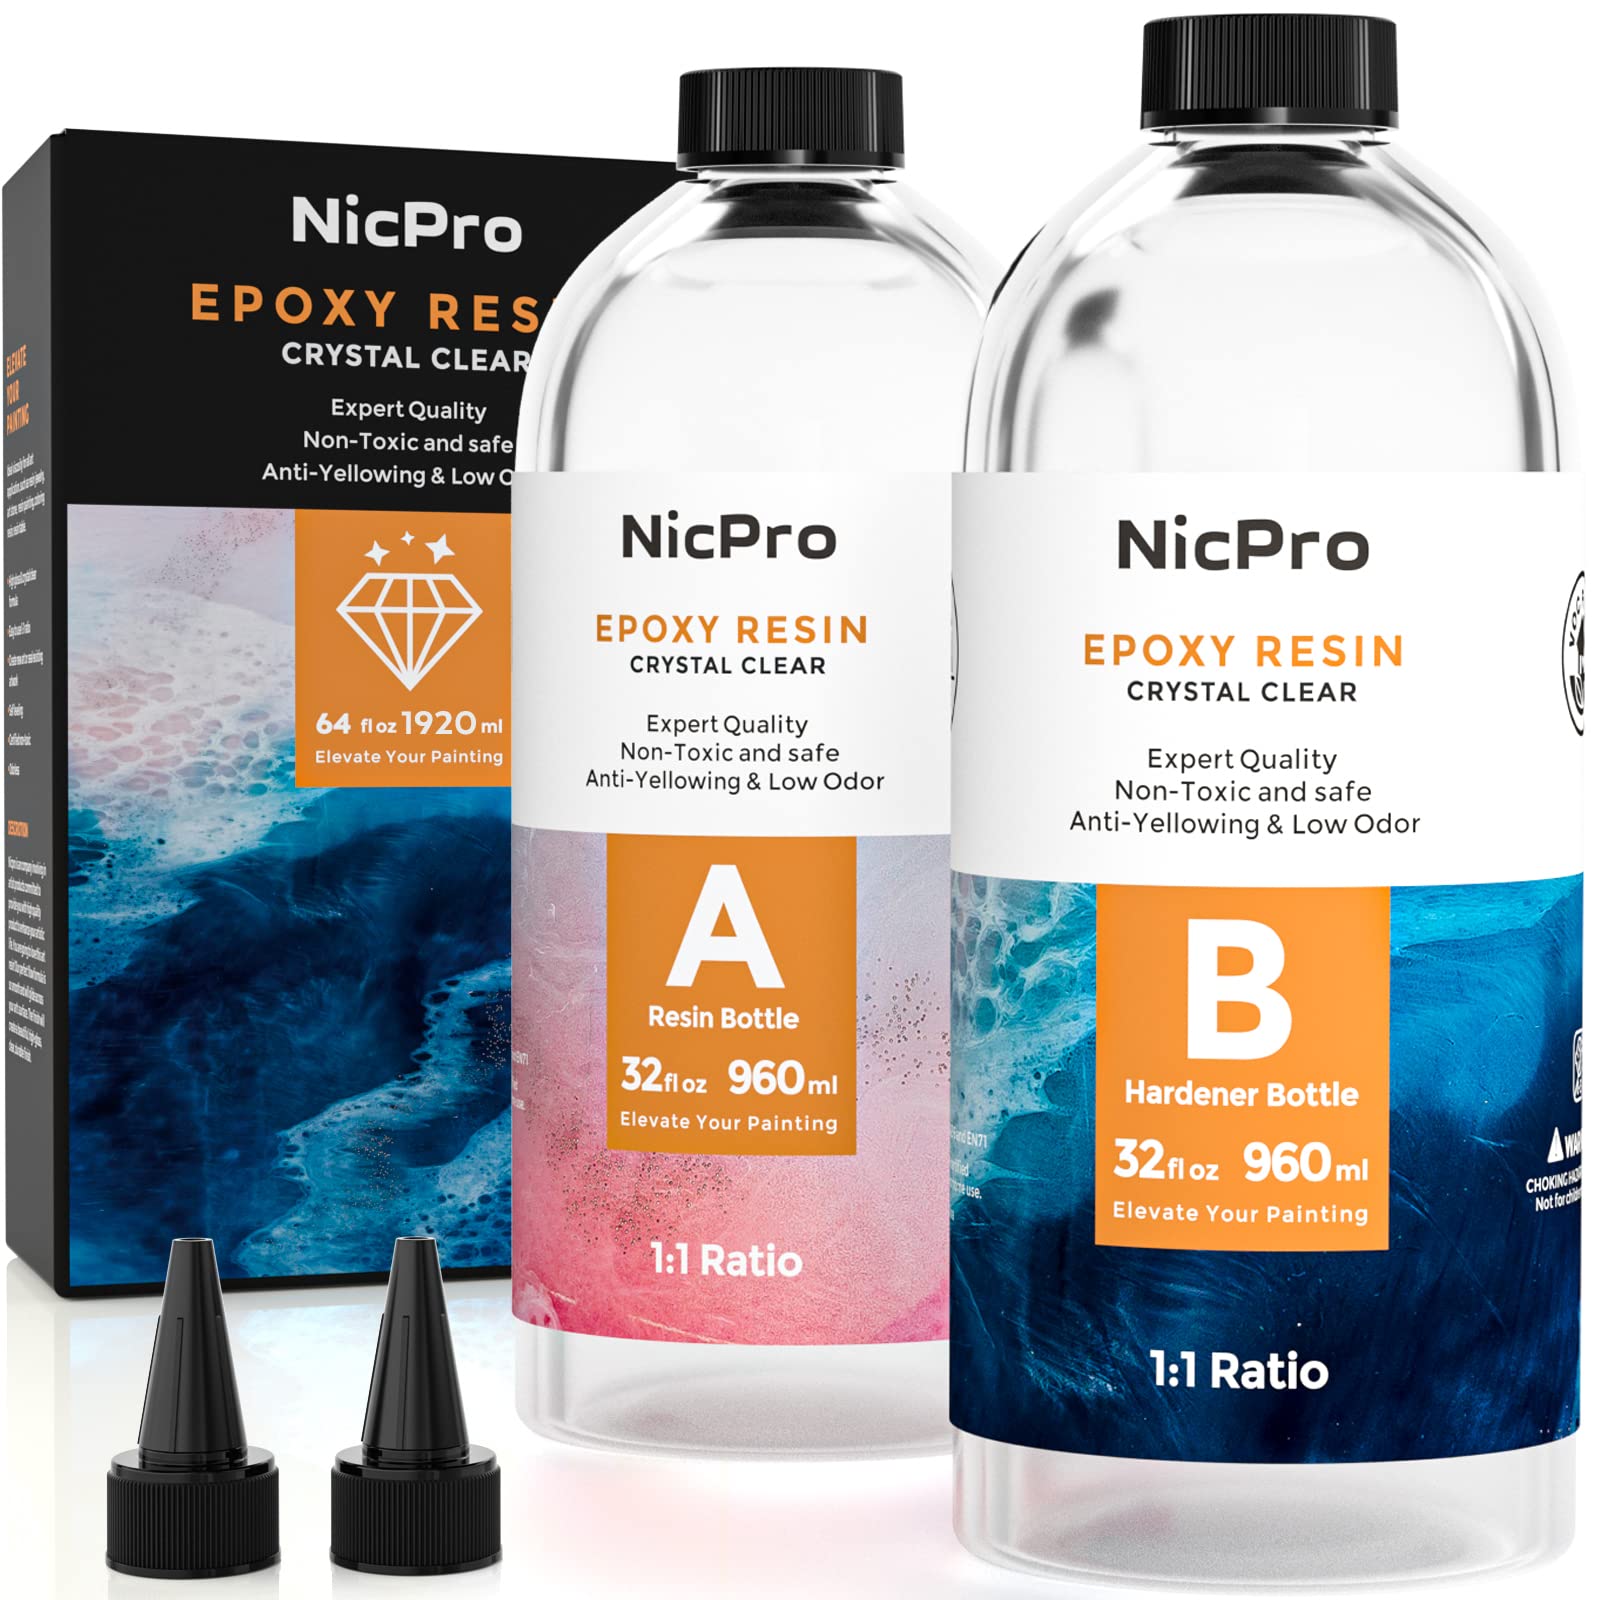 Health Canada and PHAC on X: #RECALL: Do you have a Nicpro brand epoxy  resin kit? Find out about the recall and what to do:    / X